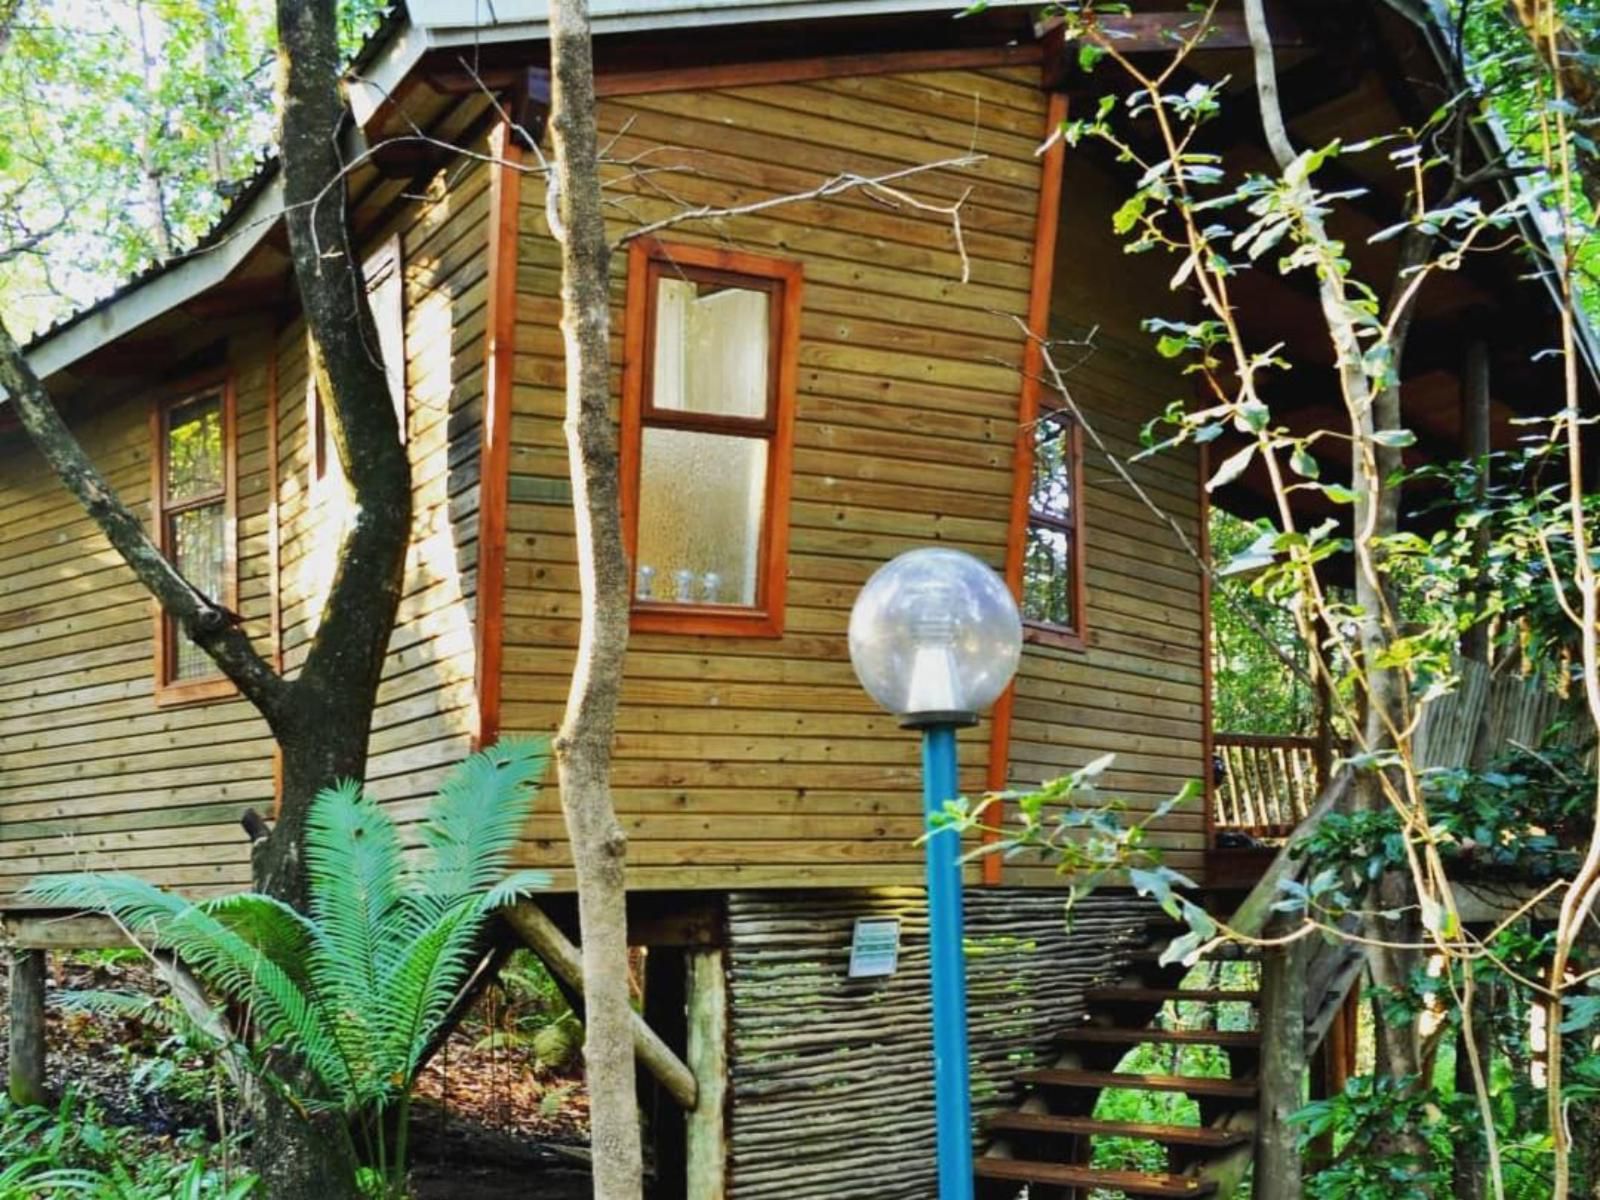 Waterbessiebos Cottage Tzaneen Limpopo Province South Africa Cabin, Building, Architecture, House